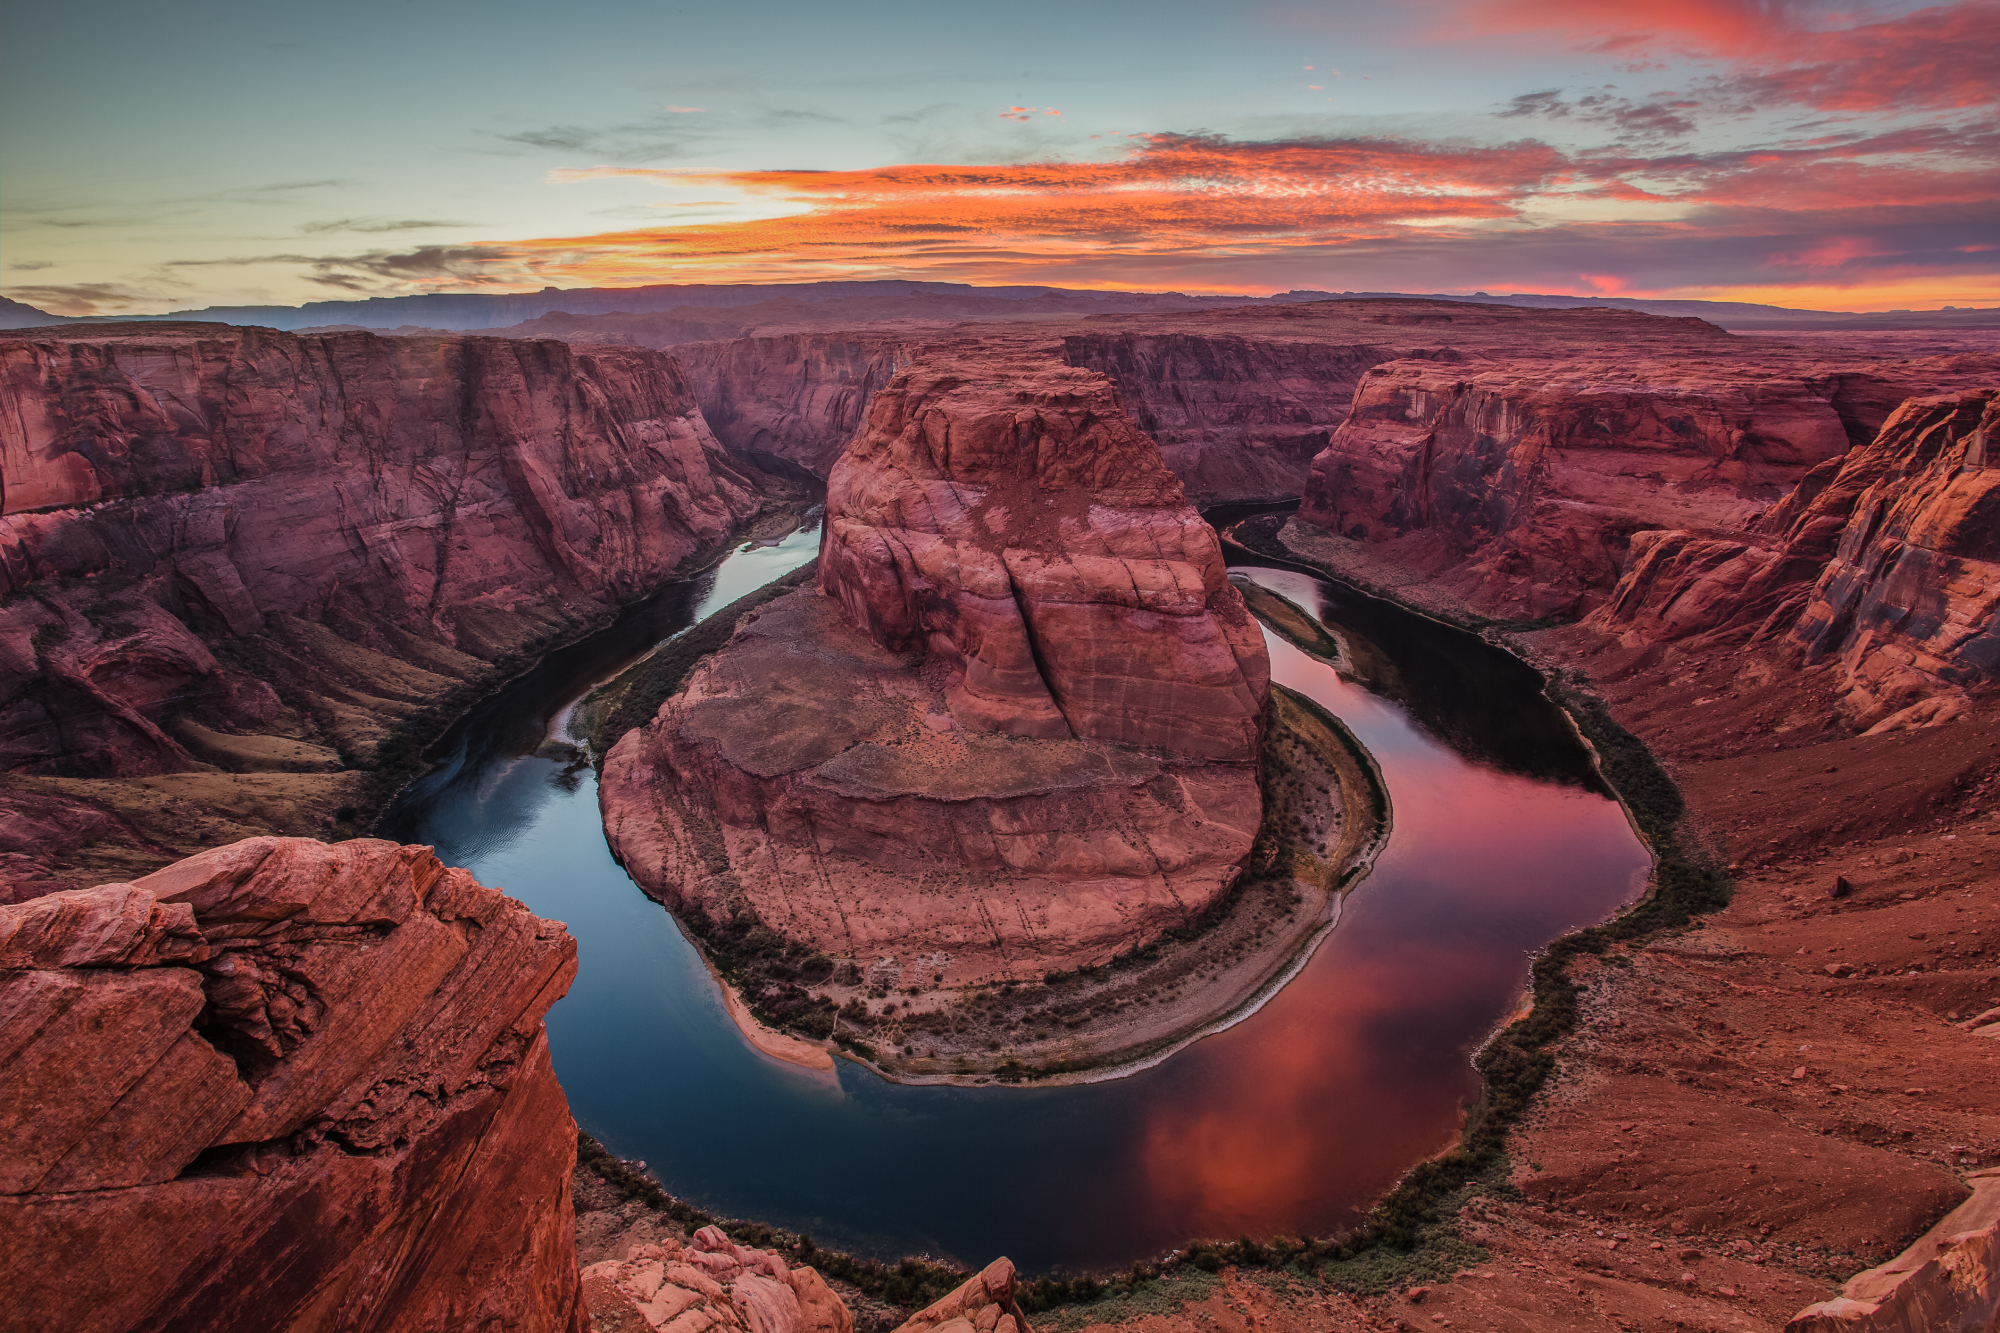 HDR Photography Workshop: Horseshoe Bend HDR | Pt.4 | RAW Processing and Adobe Photoshop Import